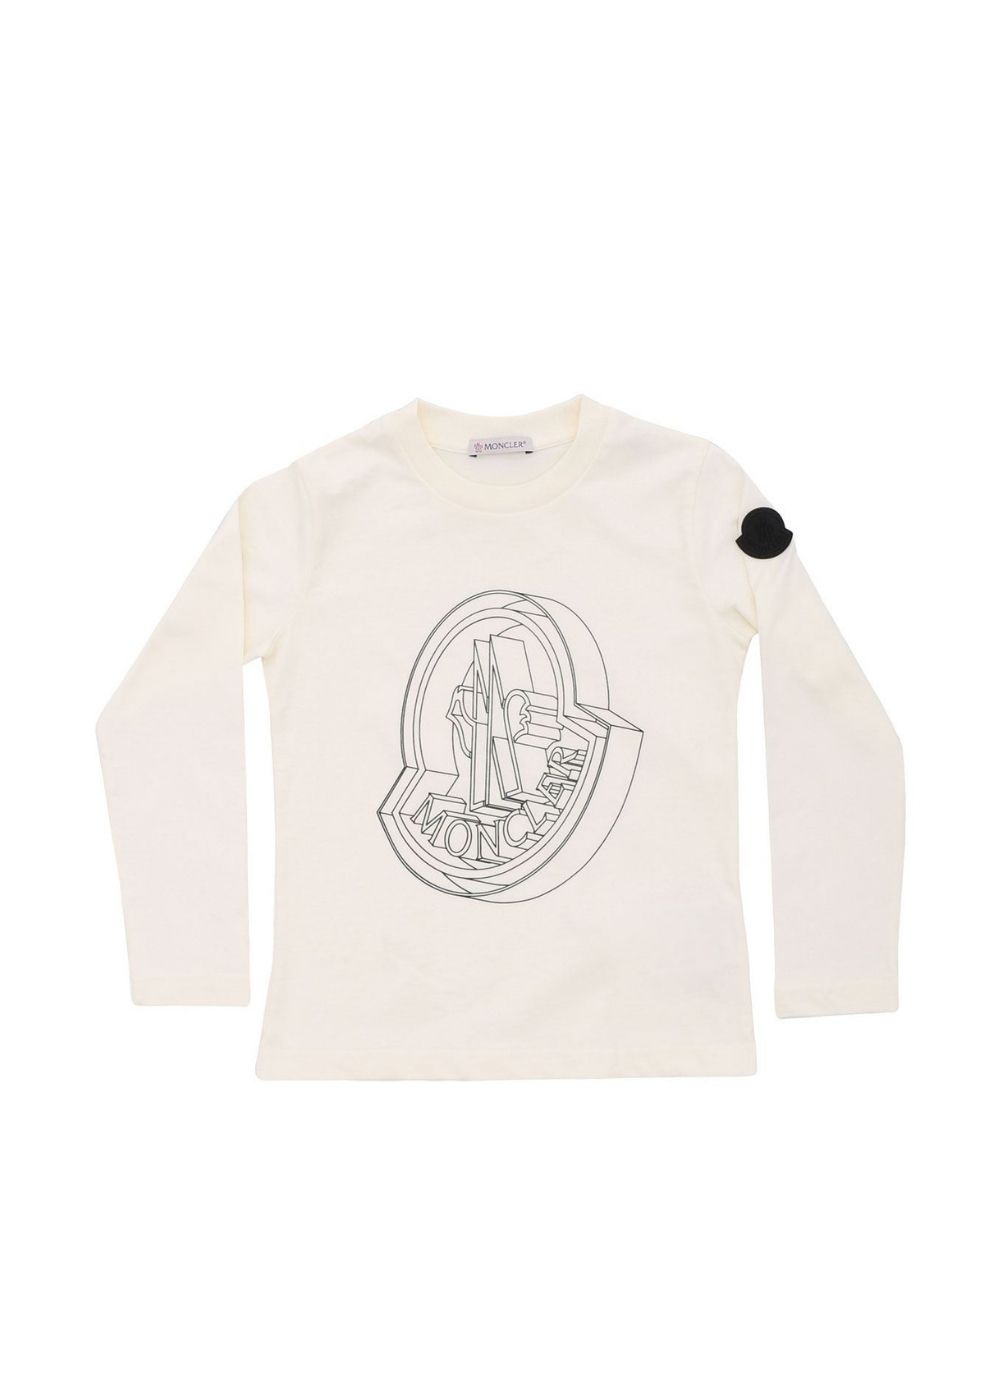 Featured image for “MONCLER T-SHIRT LOGO”